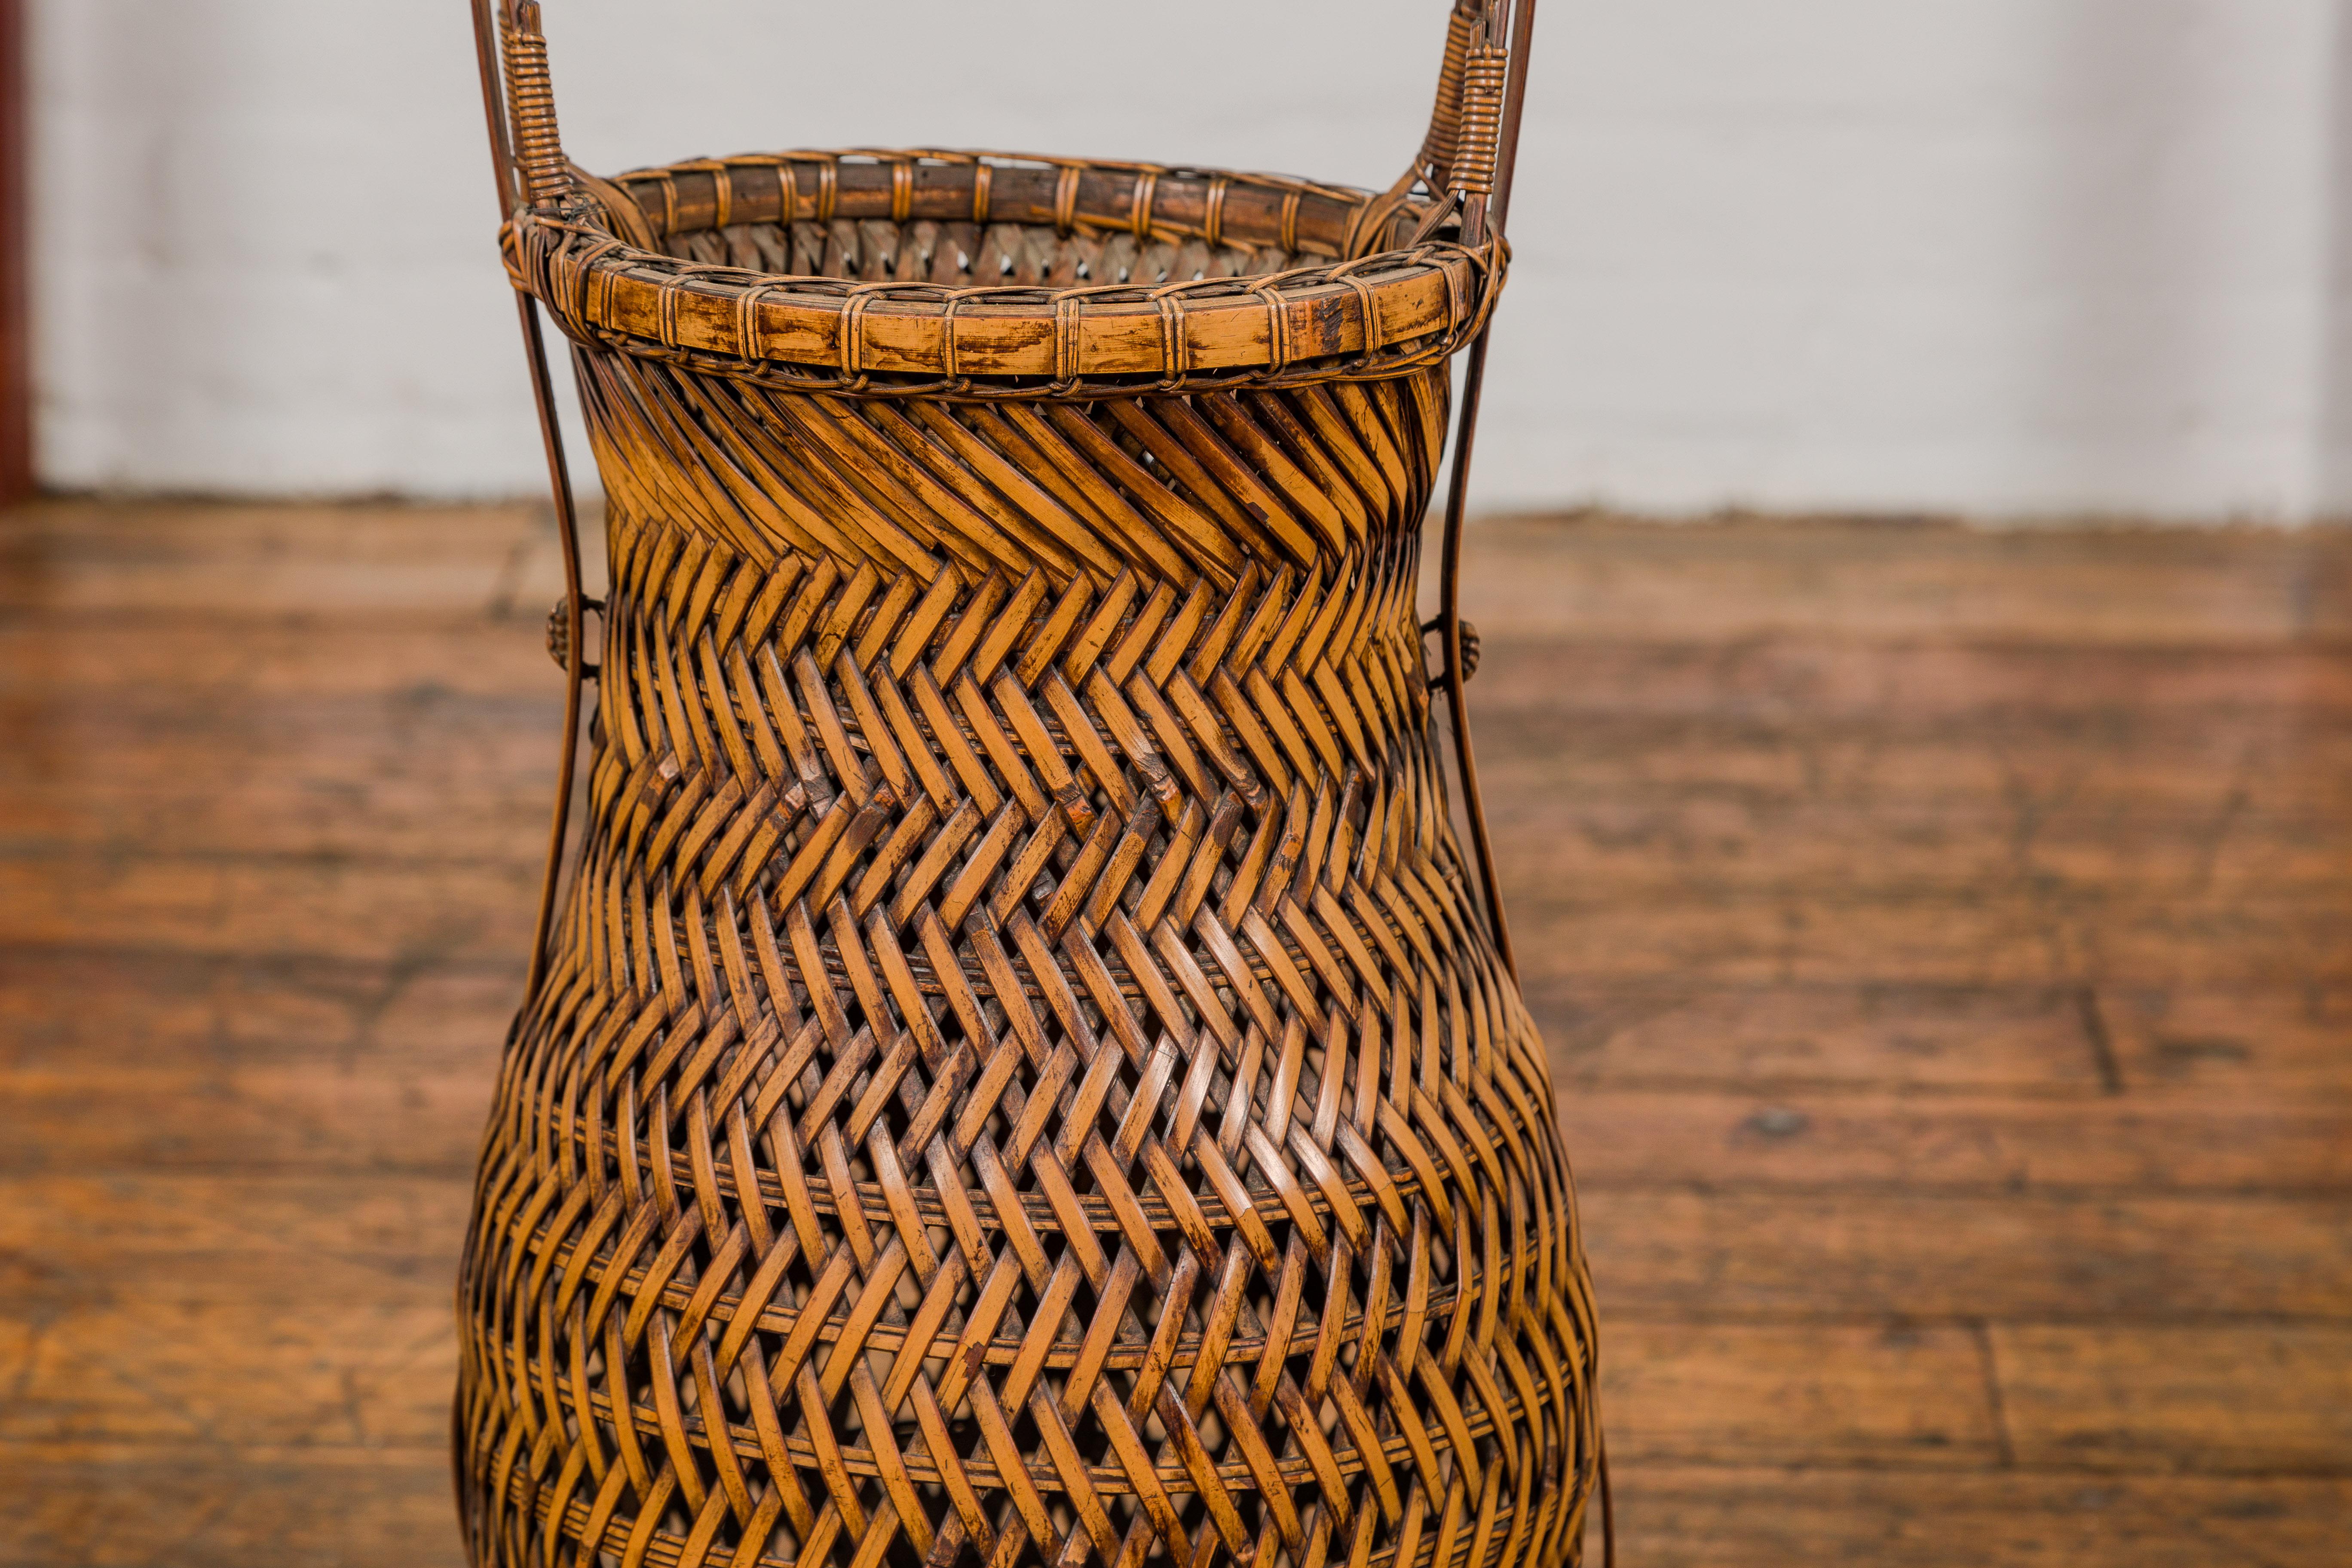 Antique Japanese Woven Bamboo Ikebana Basket with Large Handle, circa 1900 For Sale 2